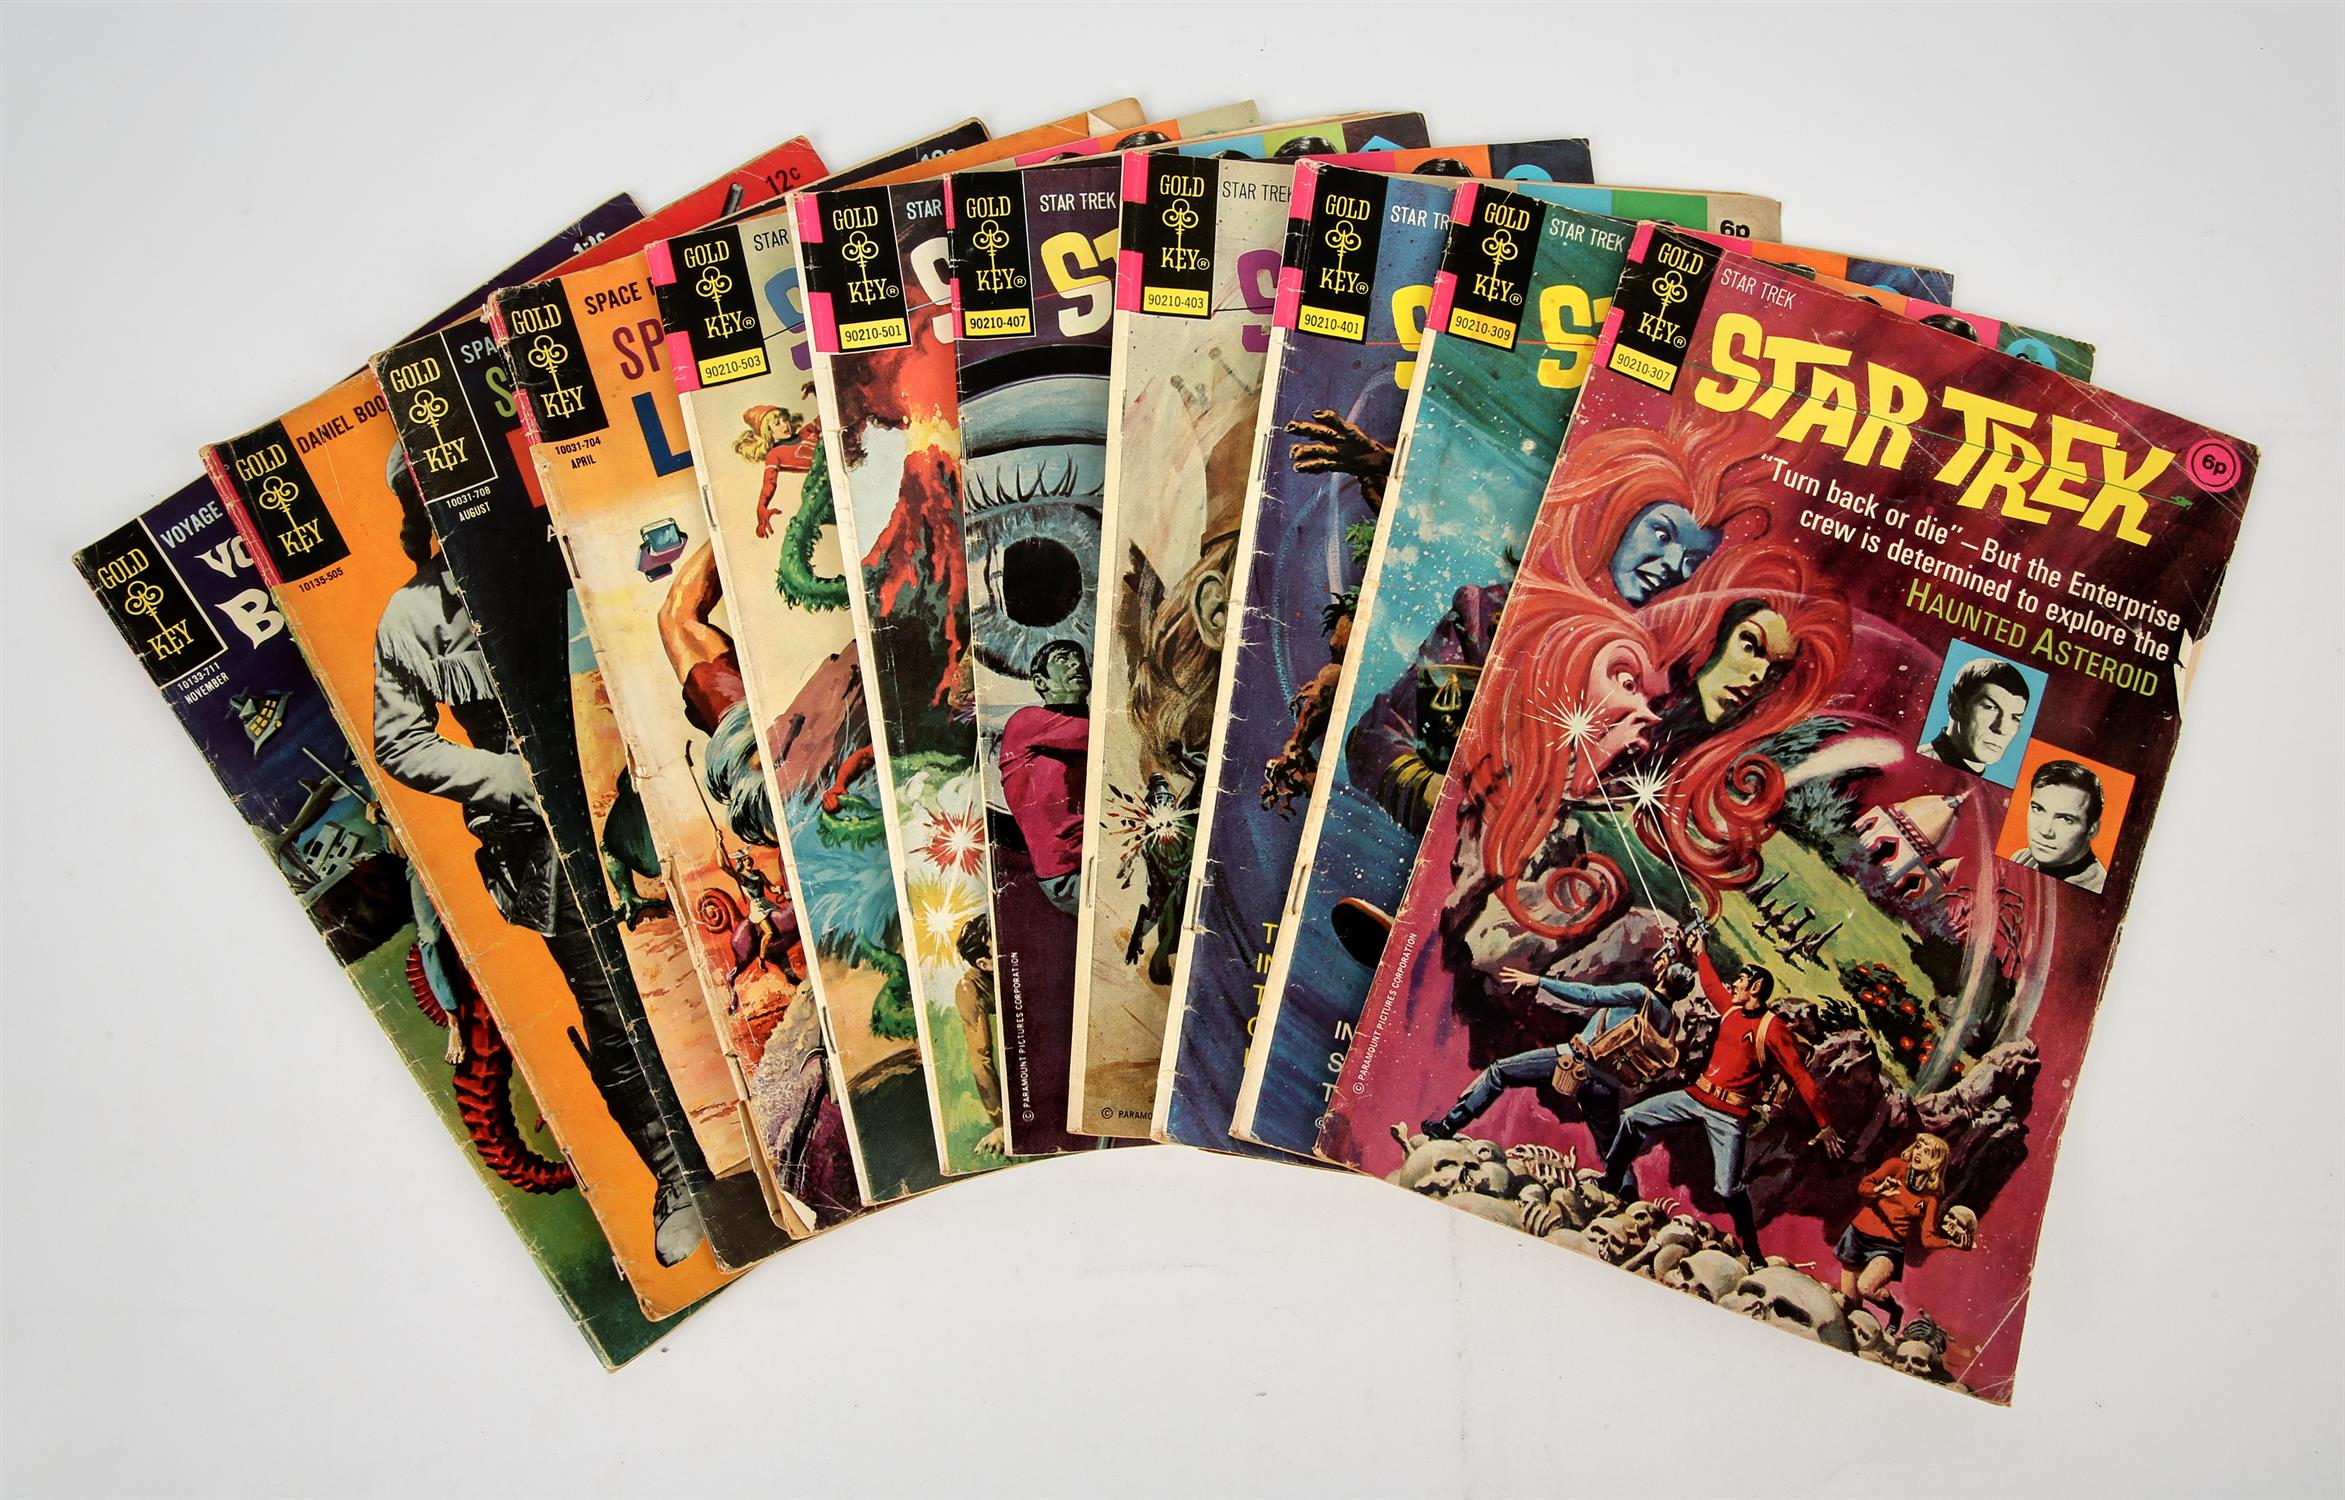 Star Trek: 7 Silver-age Gold Key issues and some others (Gold Key publishing, 1973 onwards).